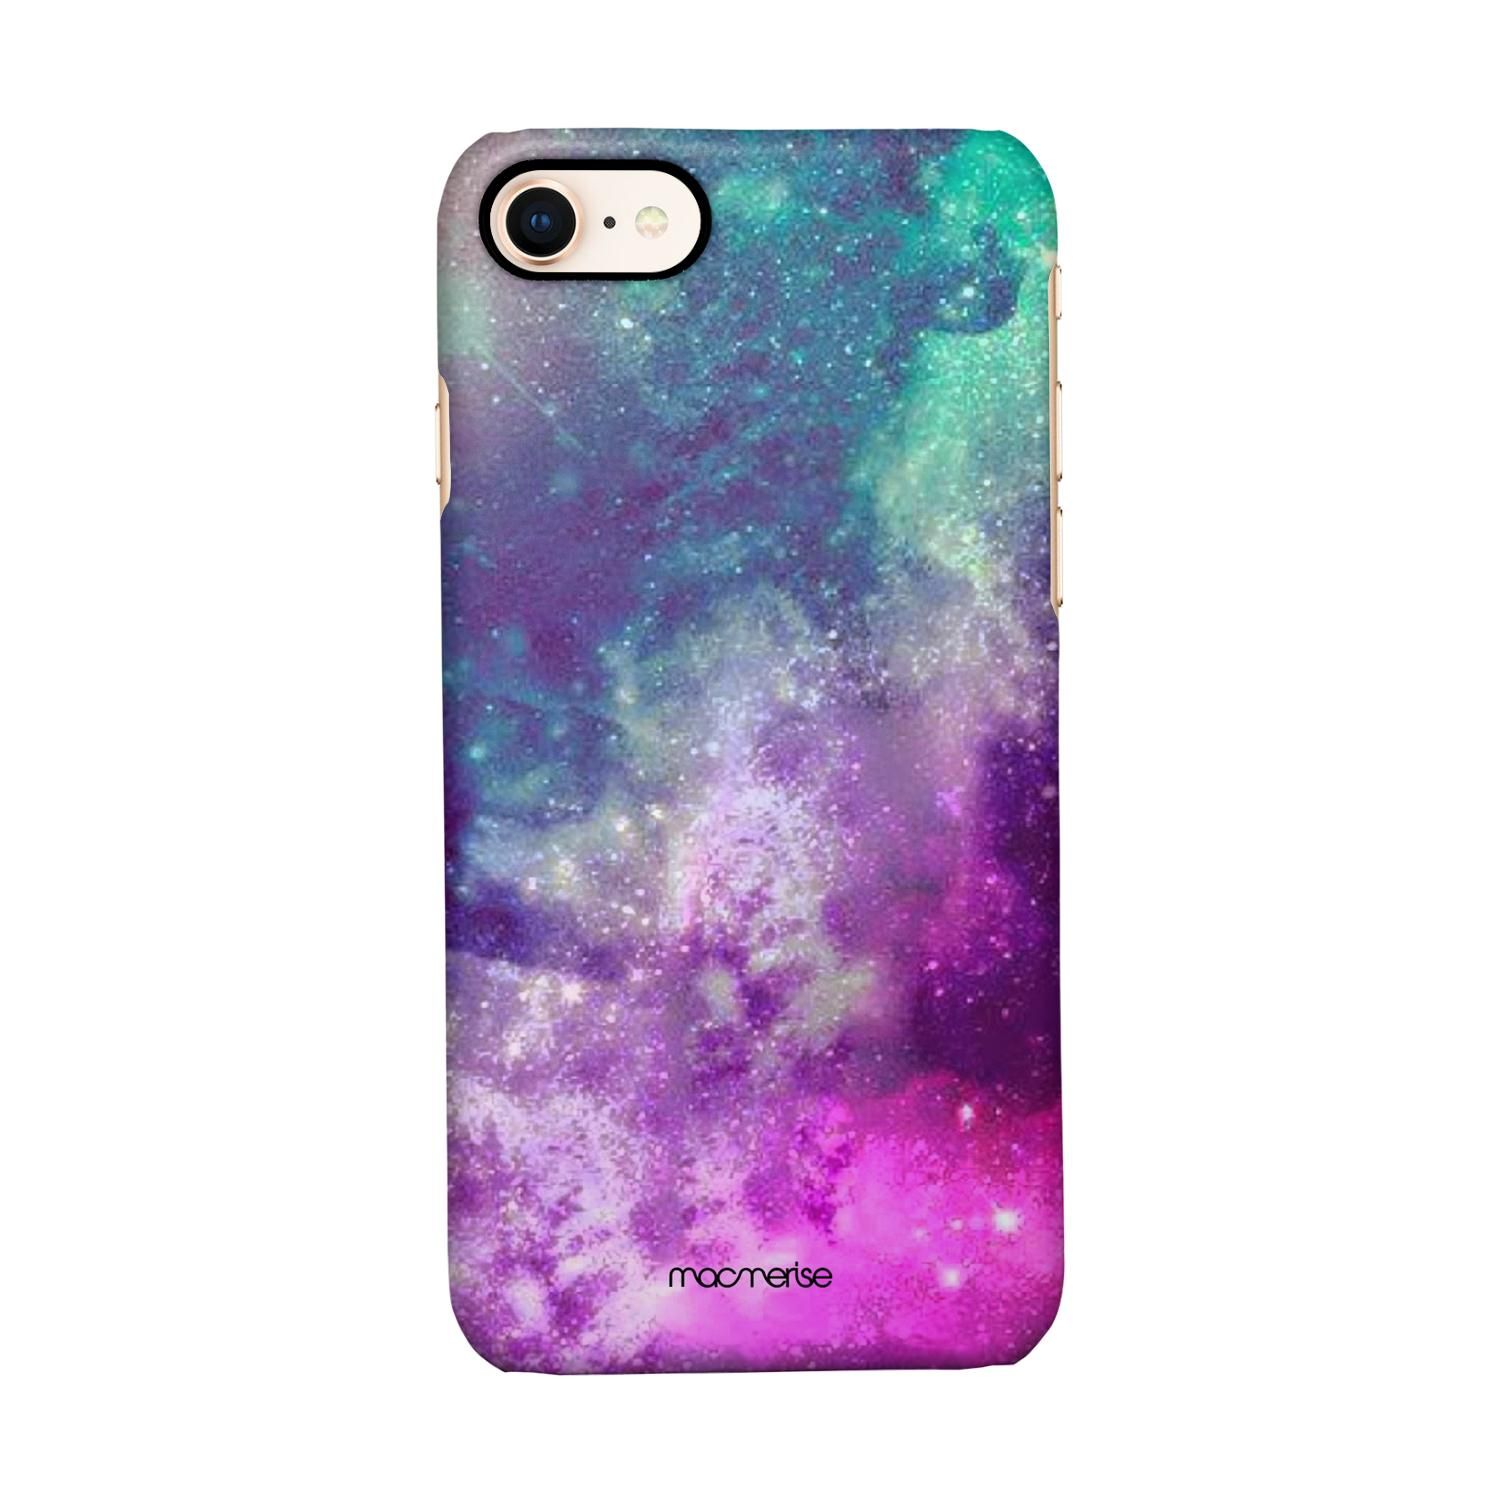 Buy The Twilight Effect - Sleek Phone Case for iPhone 7 Online